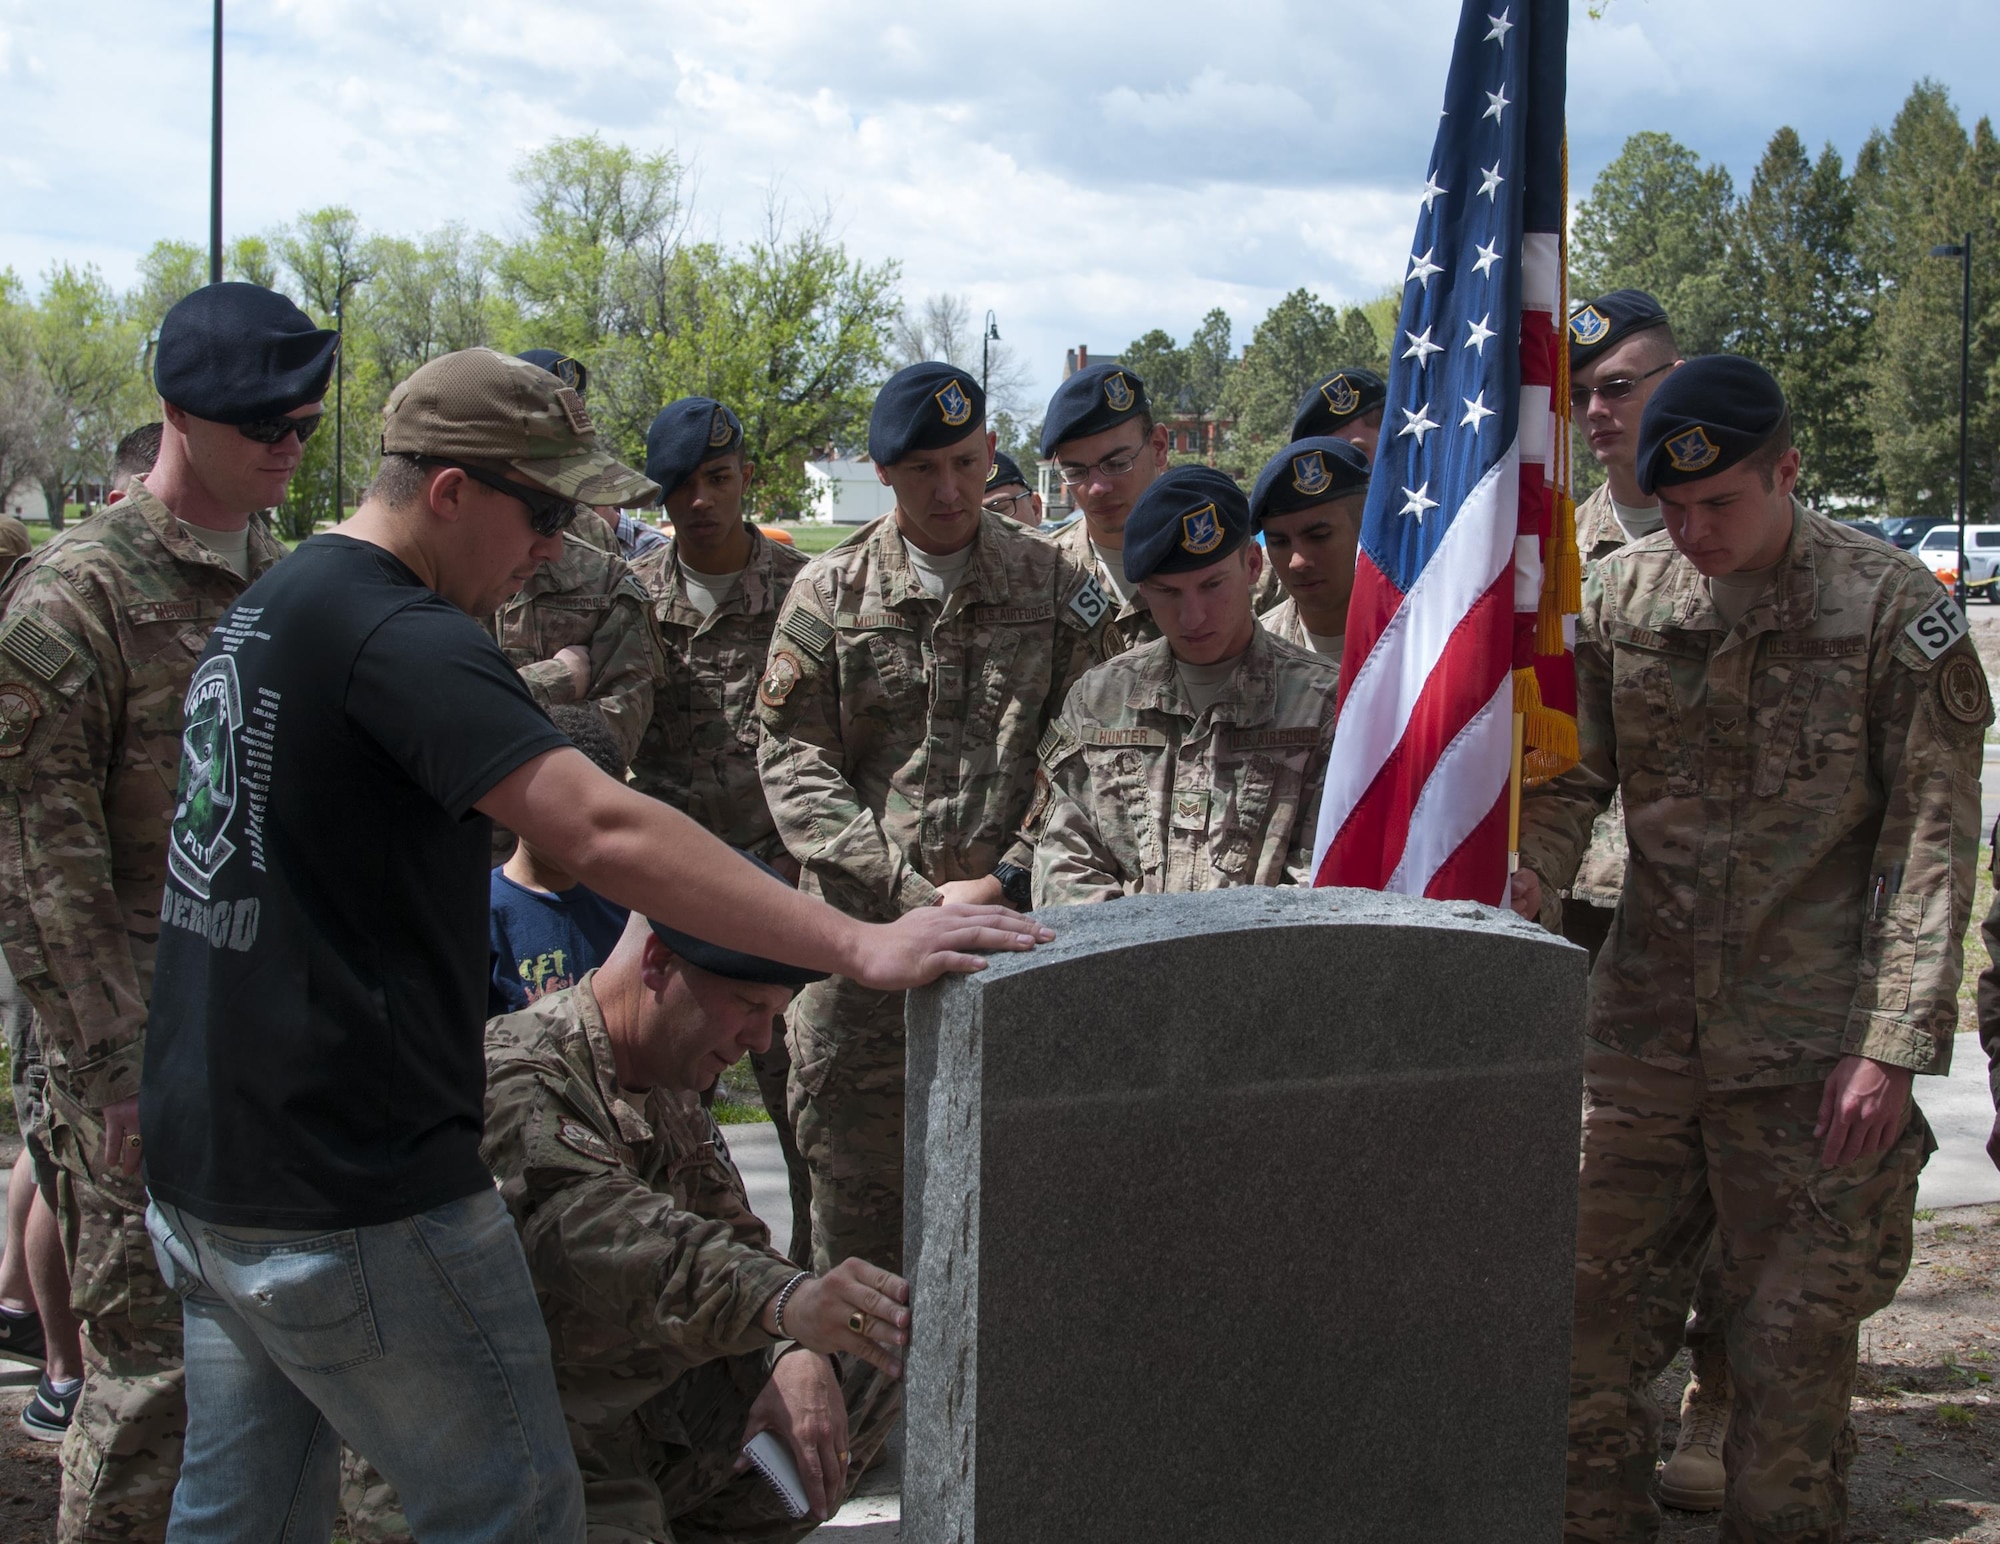 Airmen of the 790th Missile Security Forces Squadron look at the newly unveiled memorial to fallen defenders outside the 90th Security Forces Group building on F.E. Warren Air Force Base, Wyo., May 30, 2016. The unveiling of the newly polished memorial took place on Memorial Day. (U.S. Air Force photo by Senior Airman Jason Wiese)